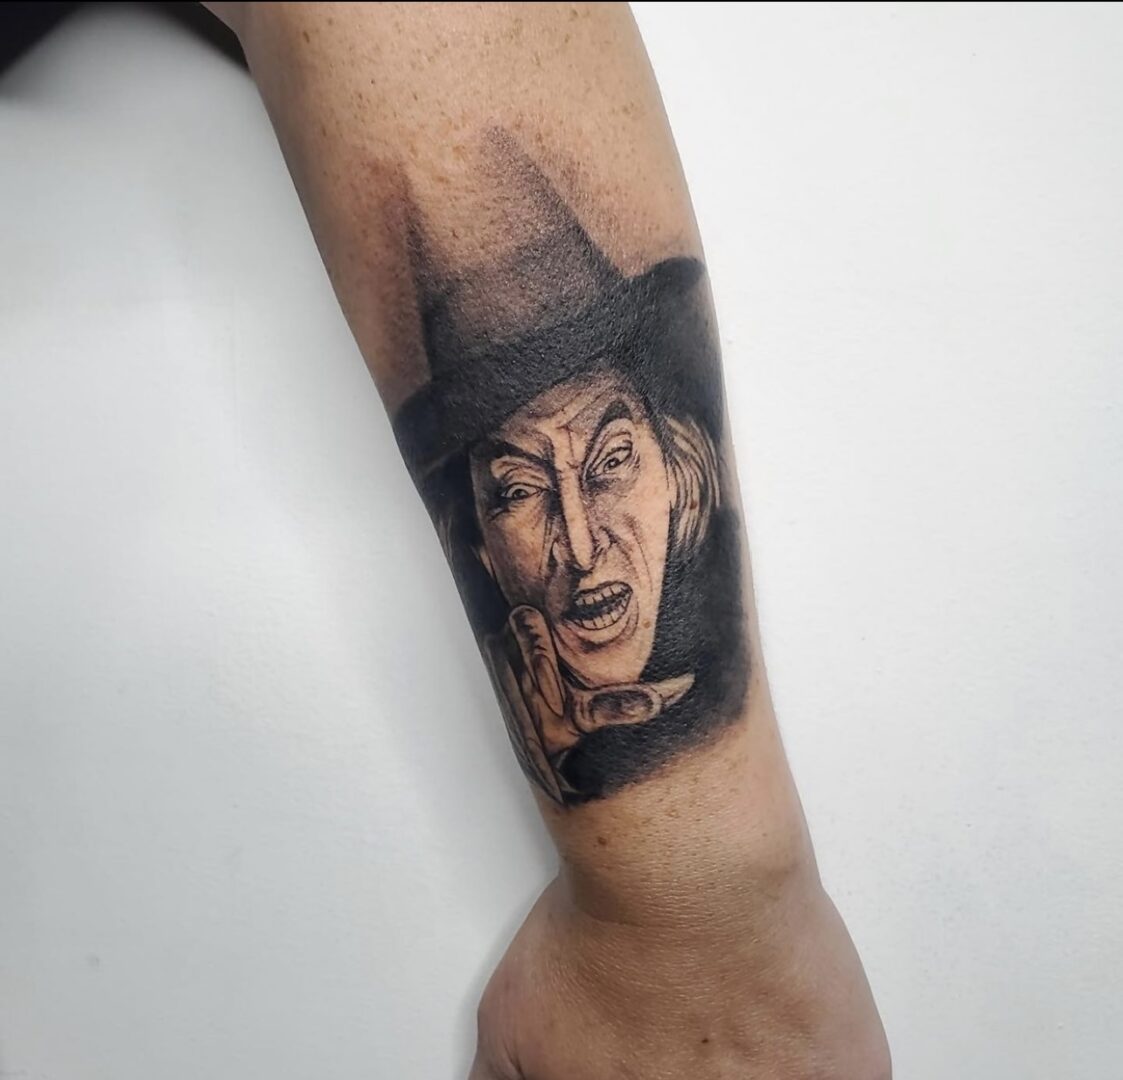 A man with a tattoo of a person wearing a hat.